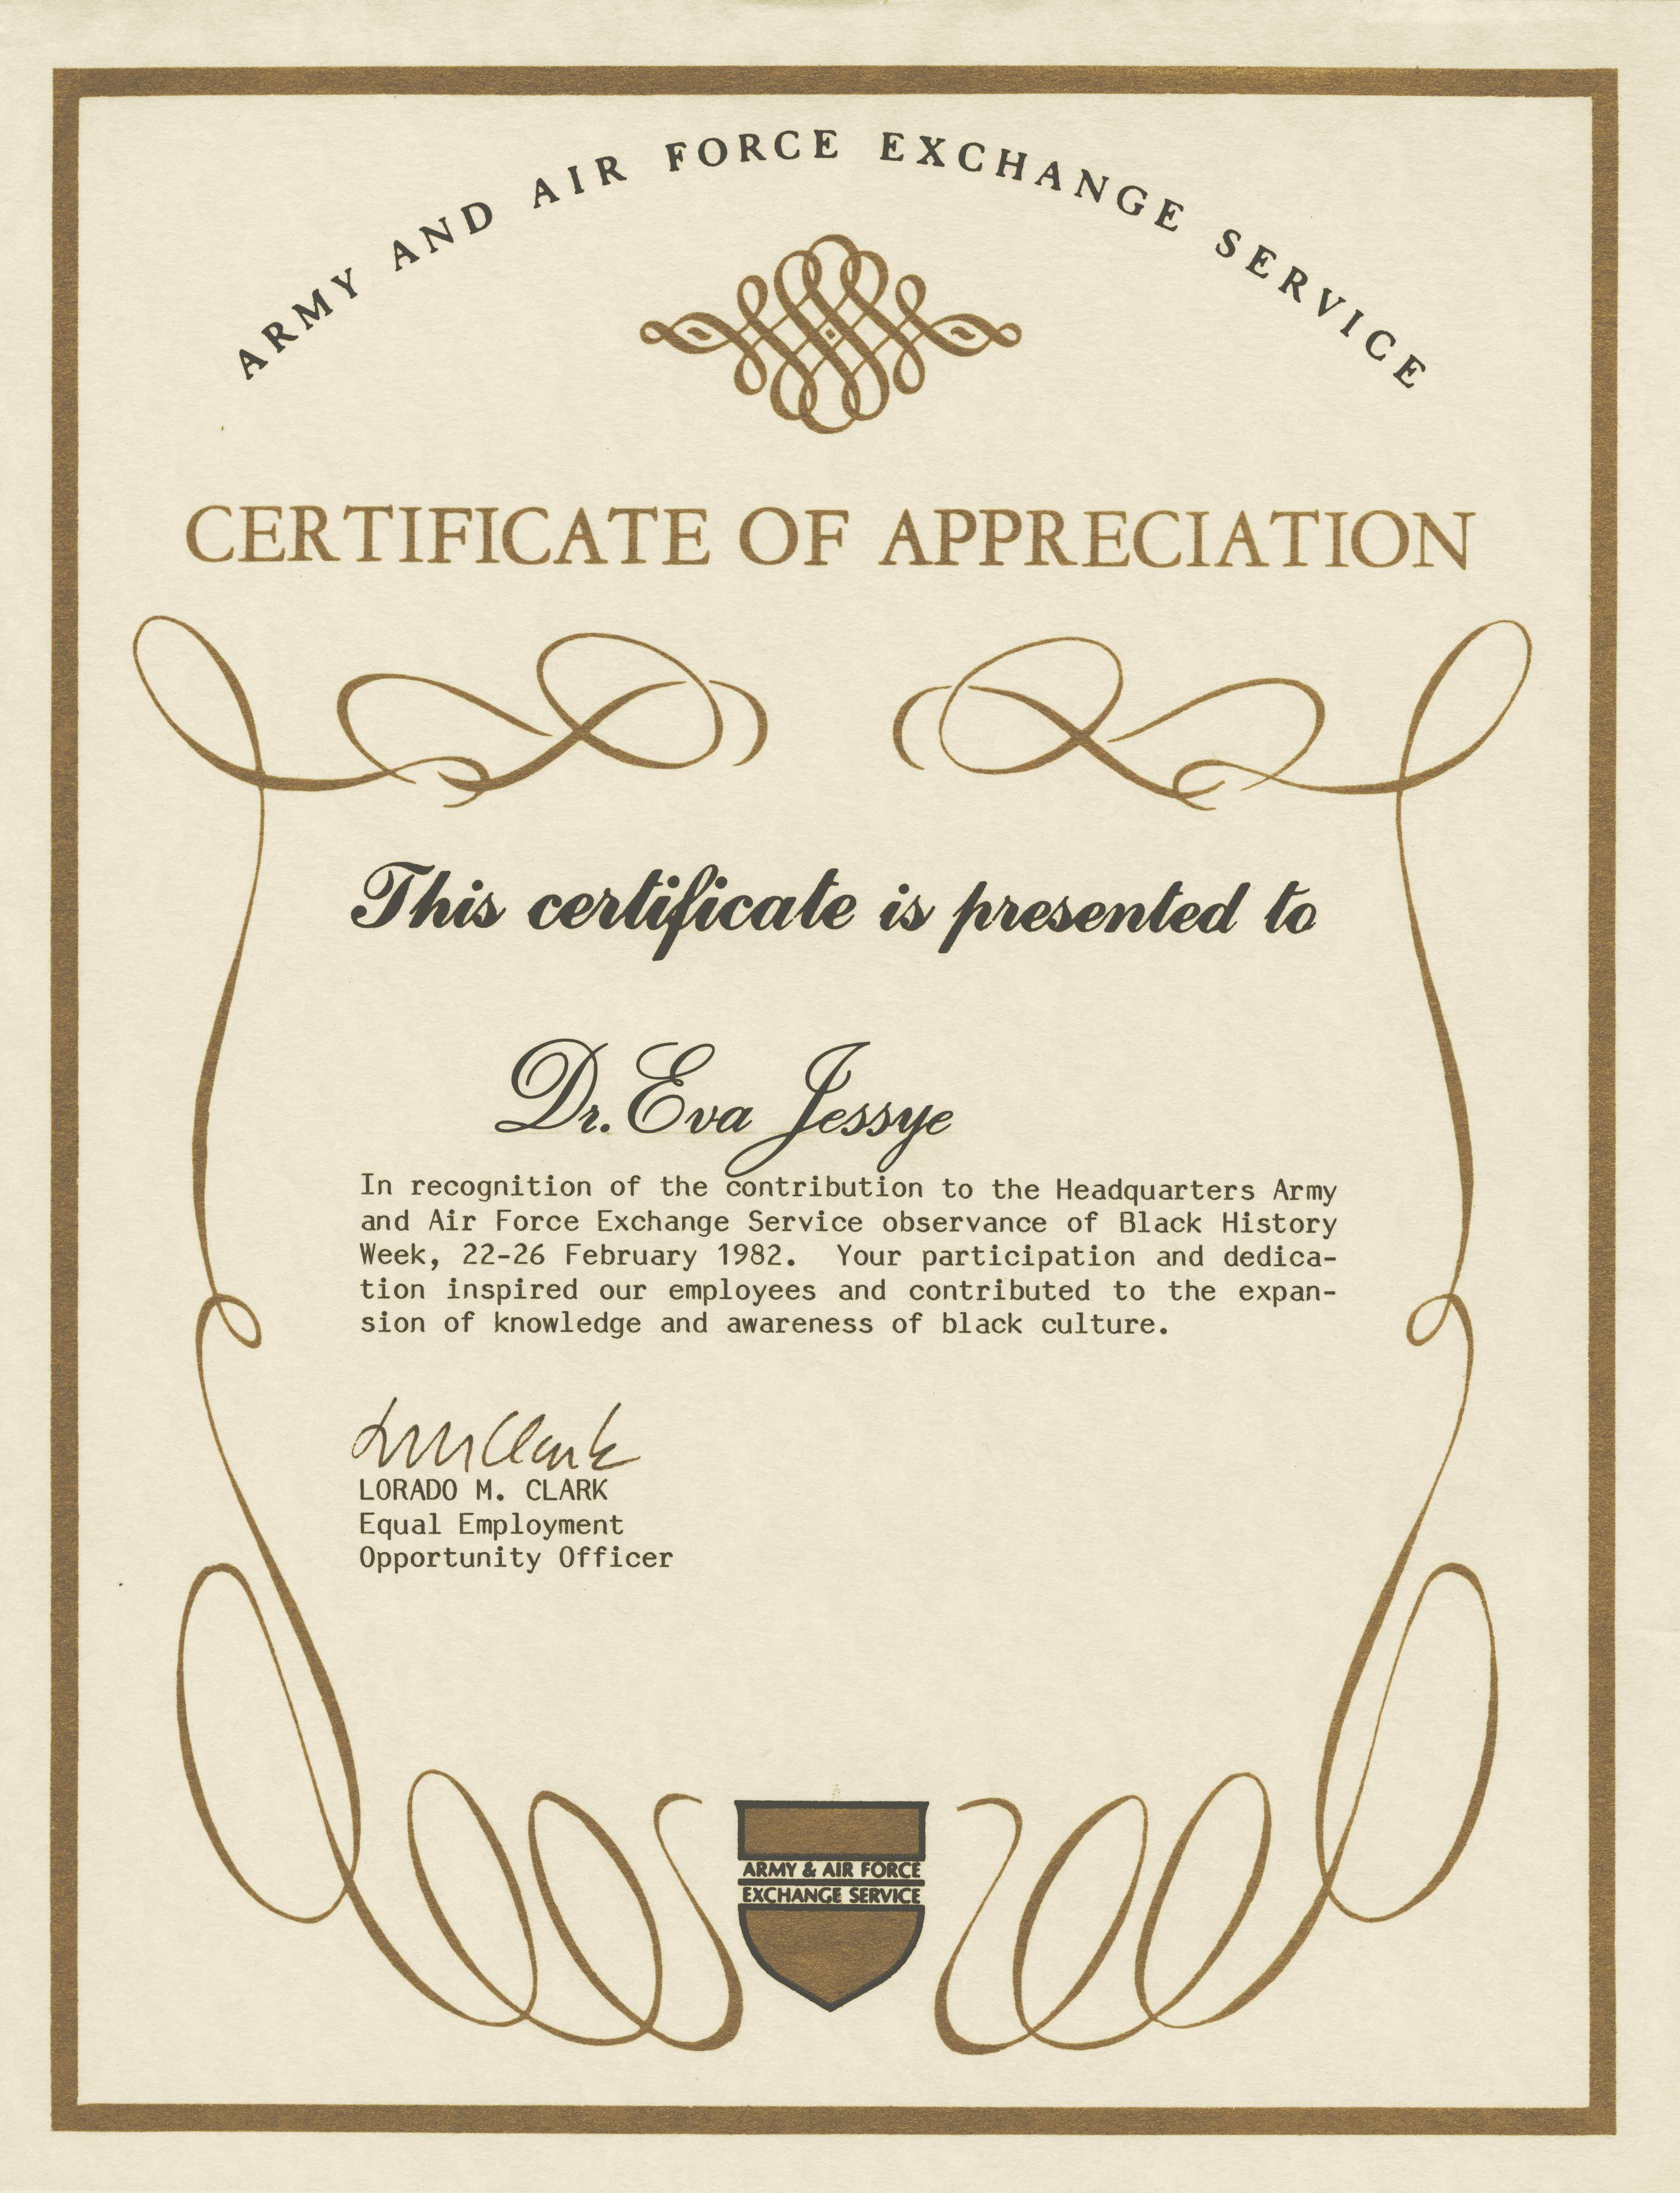 You are currently viewing 1st Air Force Certificate of Appreciation Template Free Printable